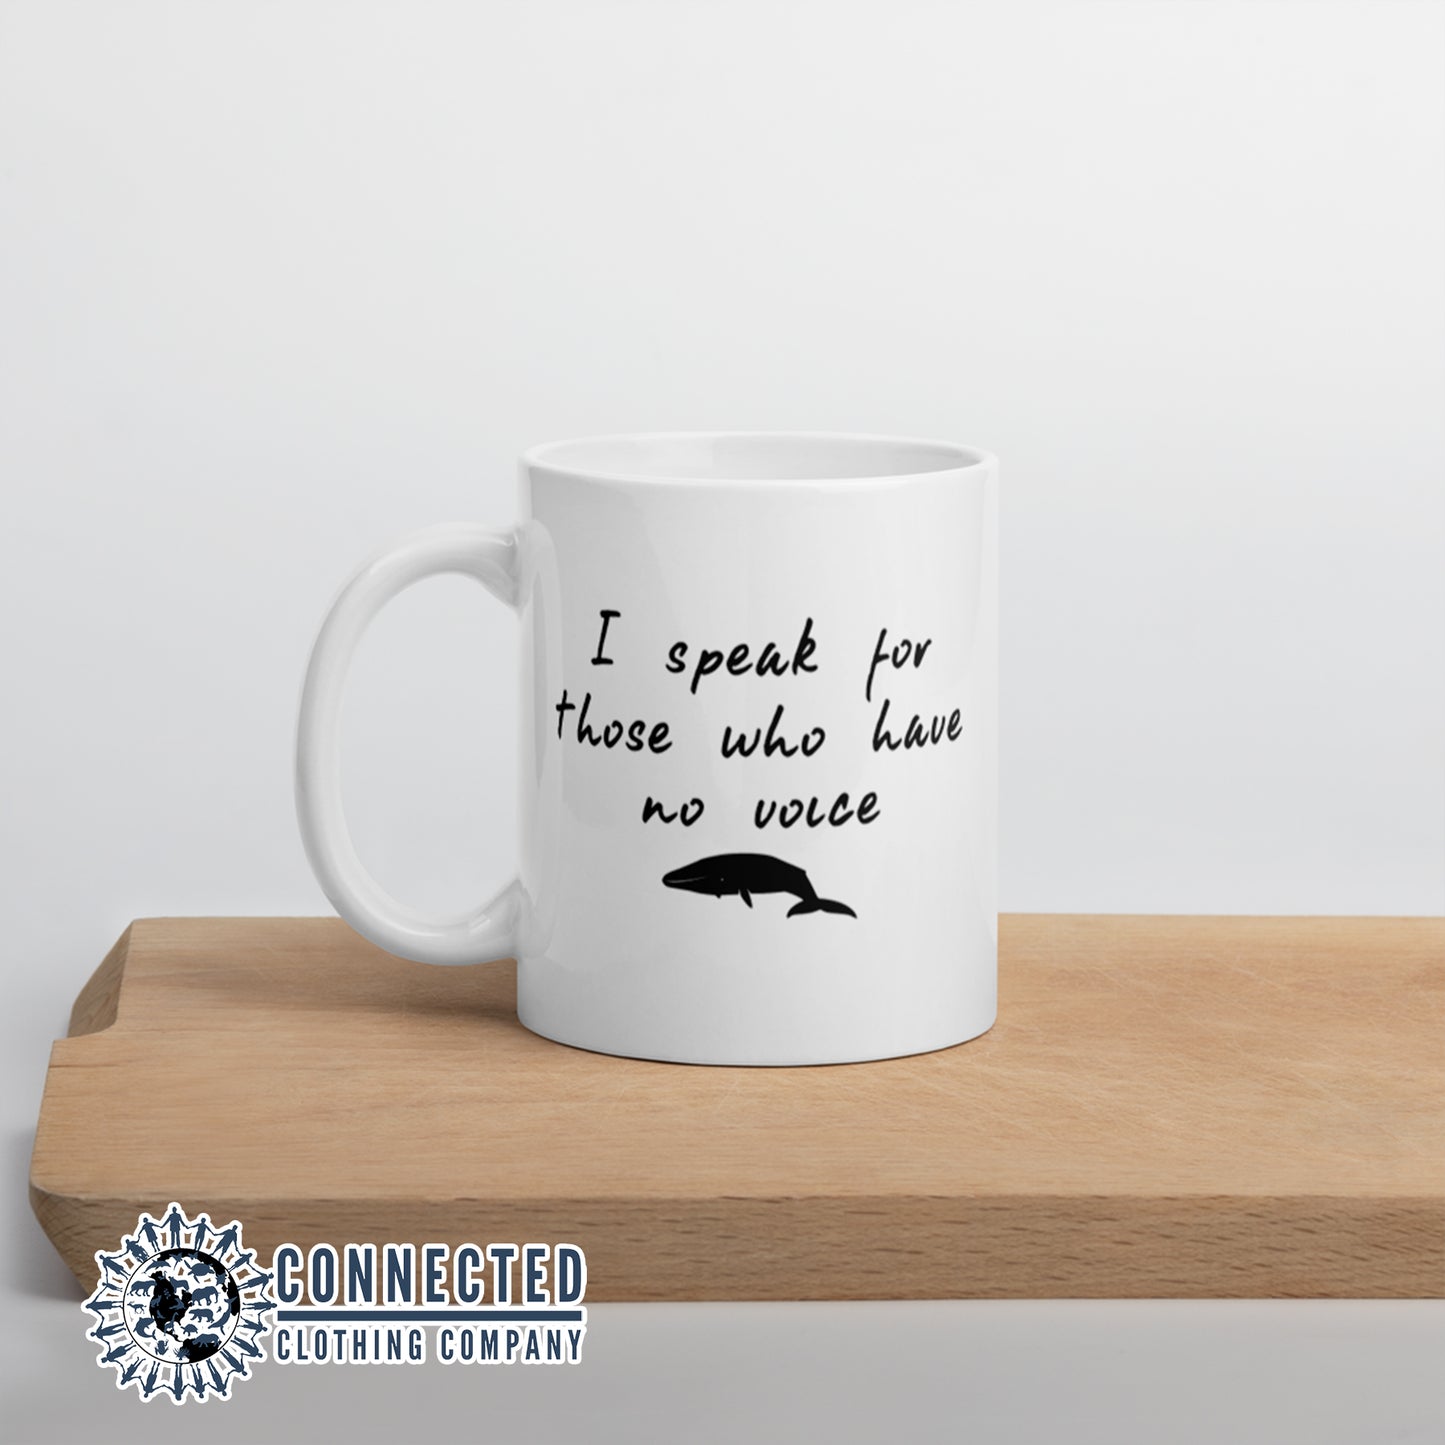 Be The Voice Whale Classic Mug - sweetsherriloudesigns donates 10% of the profits from this mug to Mission Blue ocean conservation